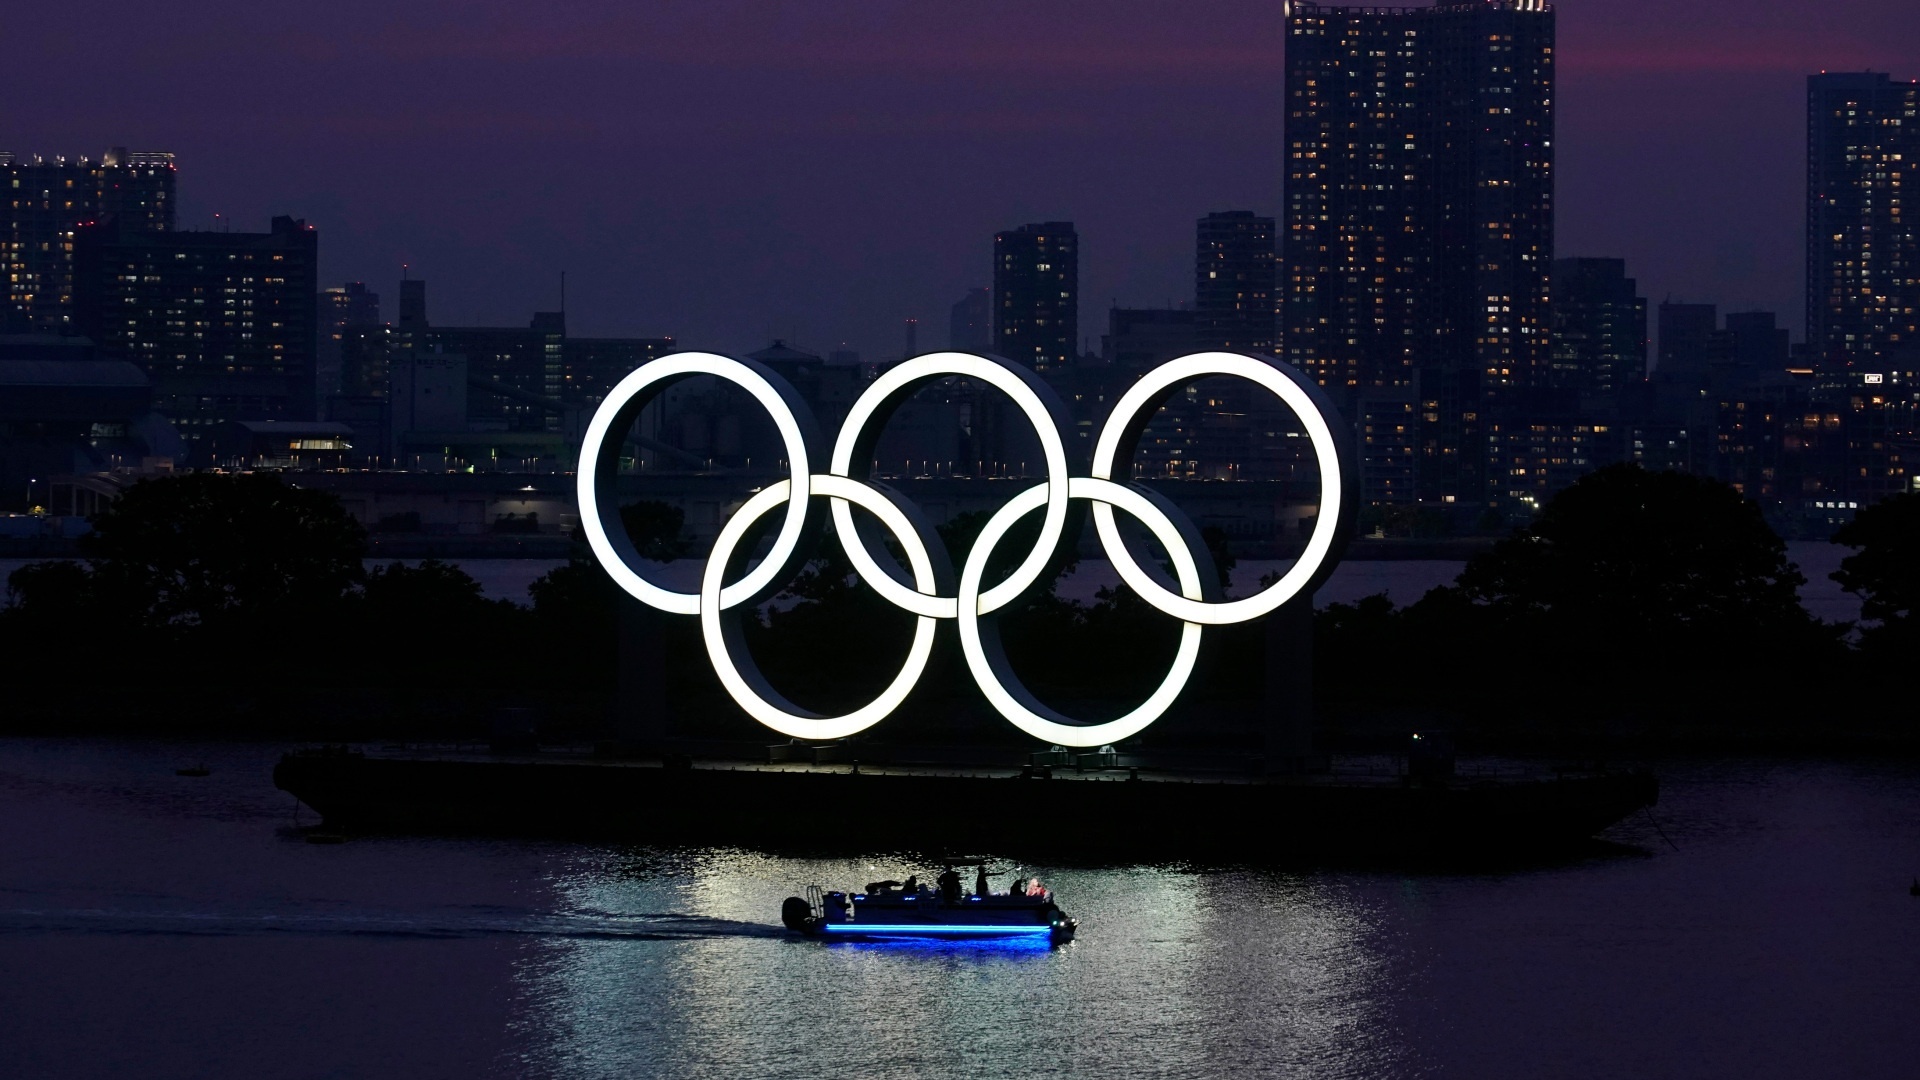 Olympics: Tokyo 2020, International Olympic Committee, Thomas Bach. 1920x1080 Full HD Background.